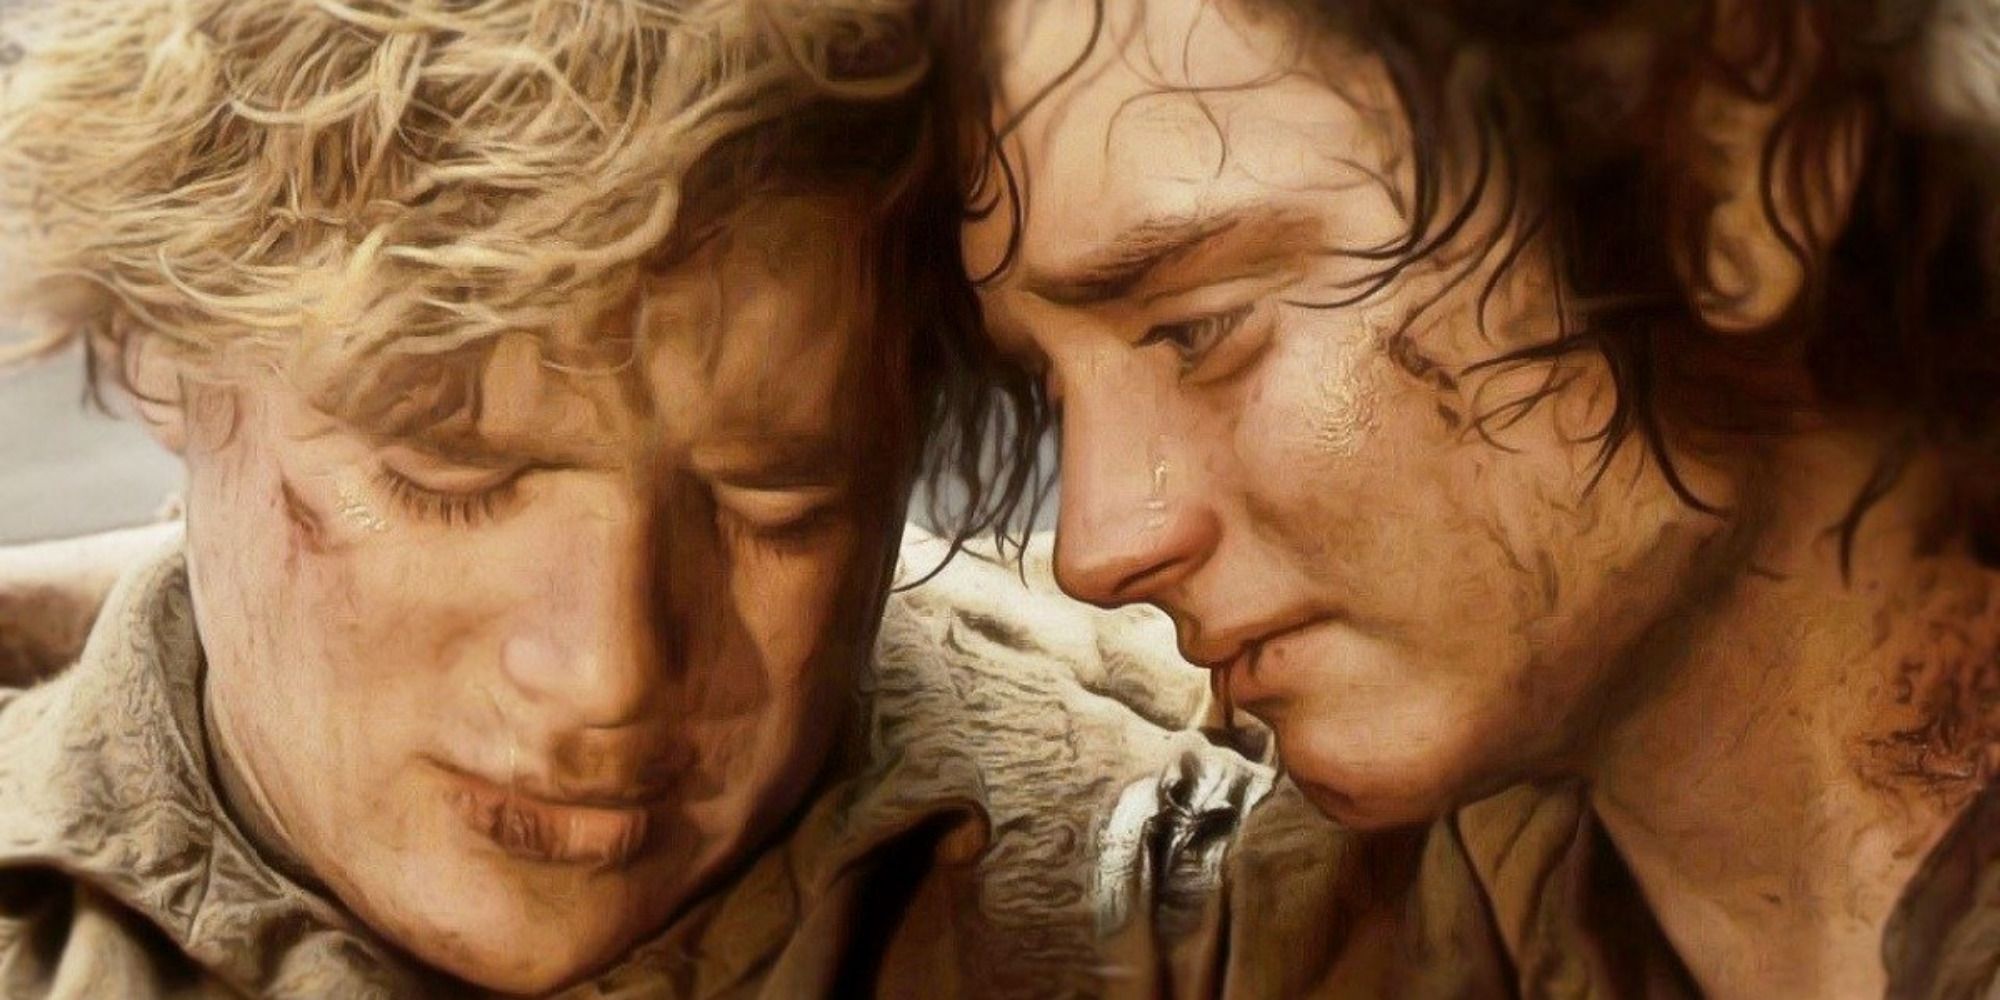 Sam and Frodo from "The Lord of the Rings"together looking defeated and exhausted